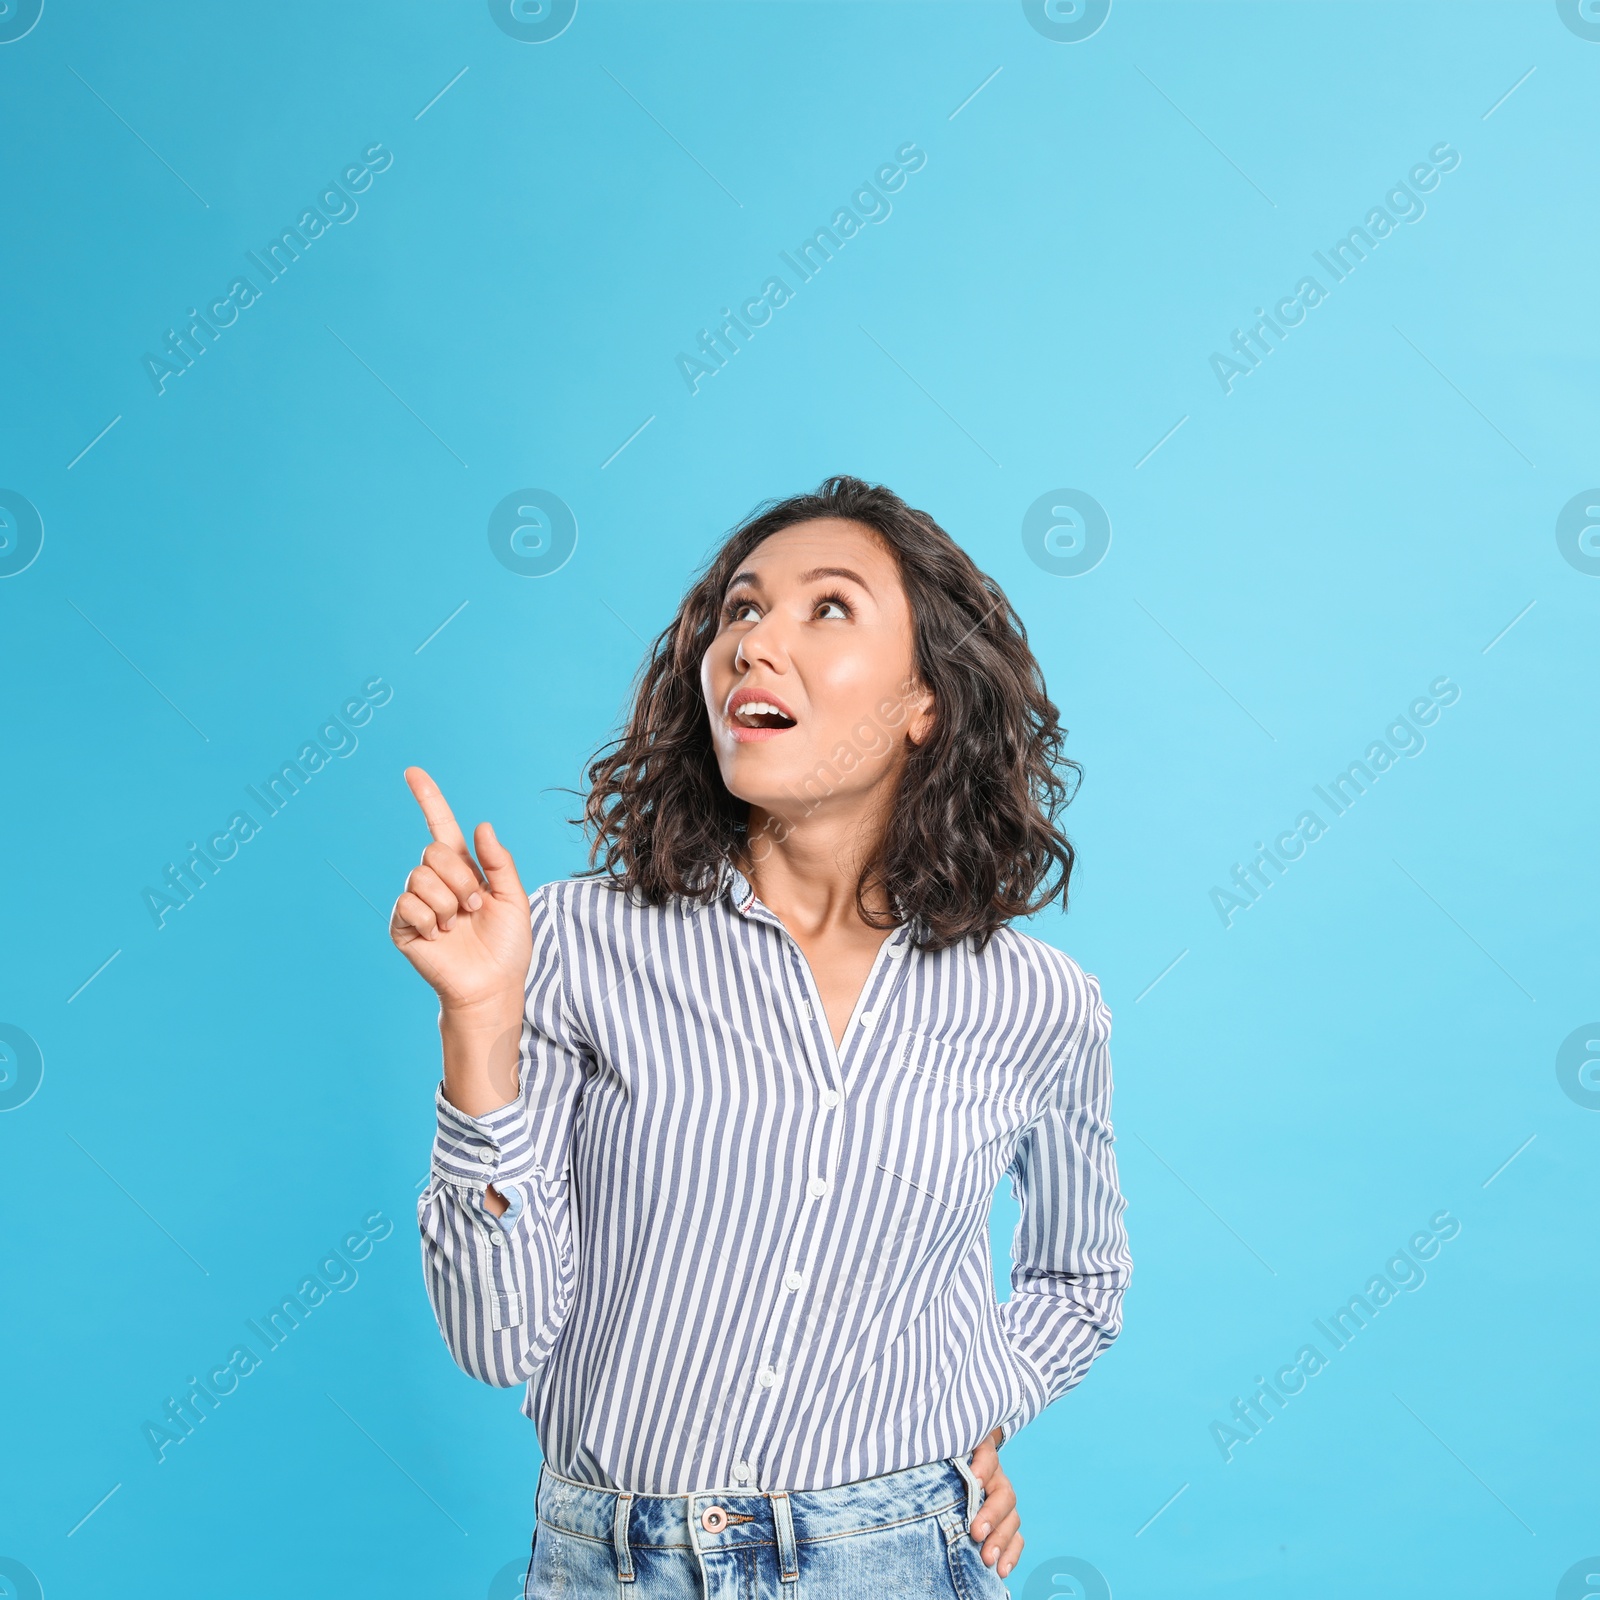 Photo of Thoughtful young woman in casual outfit on blue background